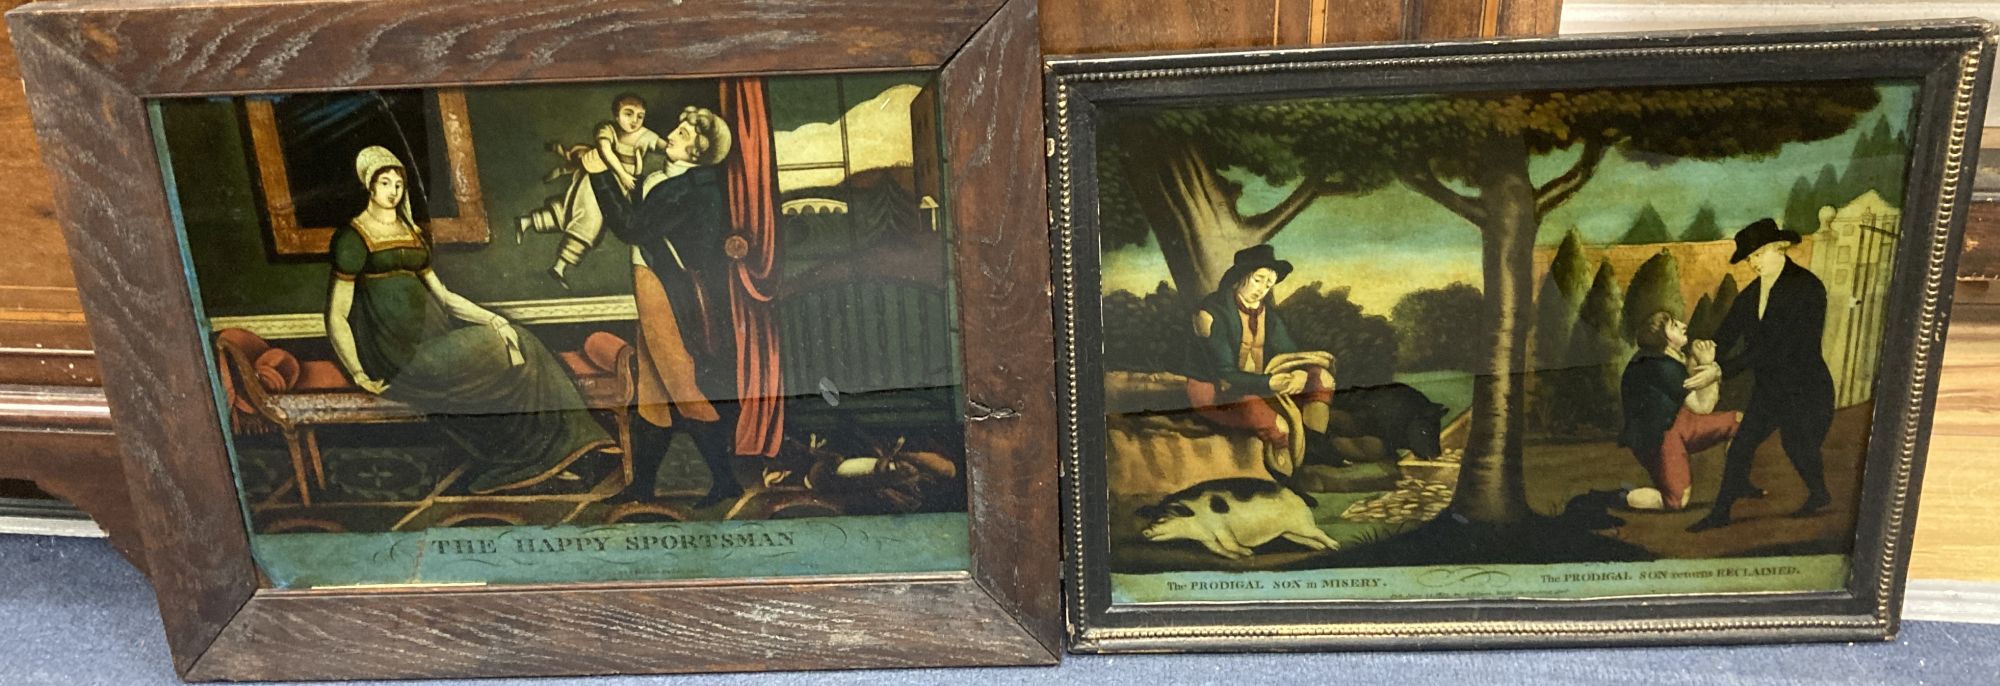 Two early 19th century coloured reverse glass prints, The Prodigal Son in Misery and The Prodigal Son returns Reclaimed, 25 x 35cm an